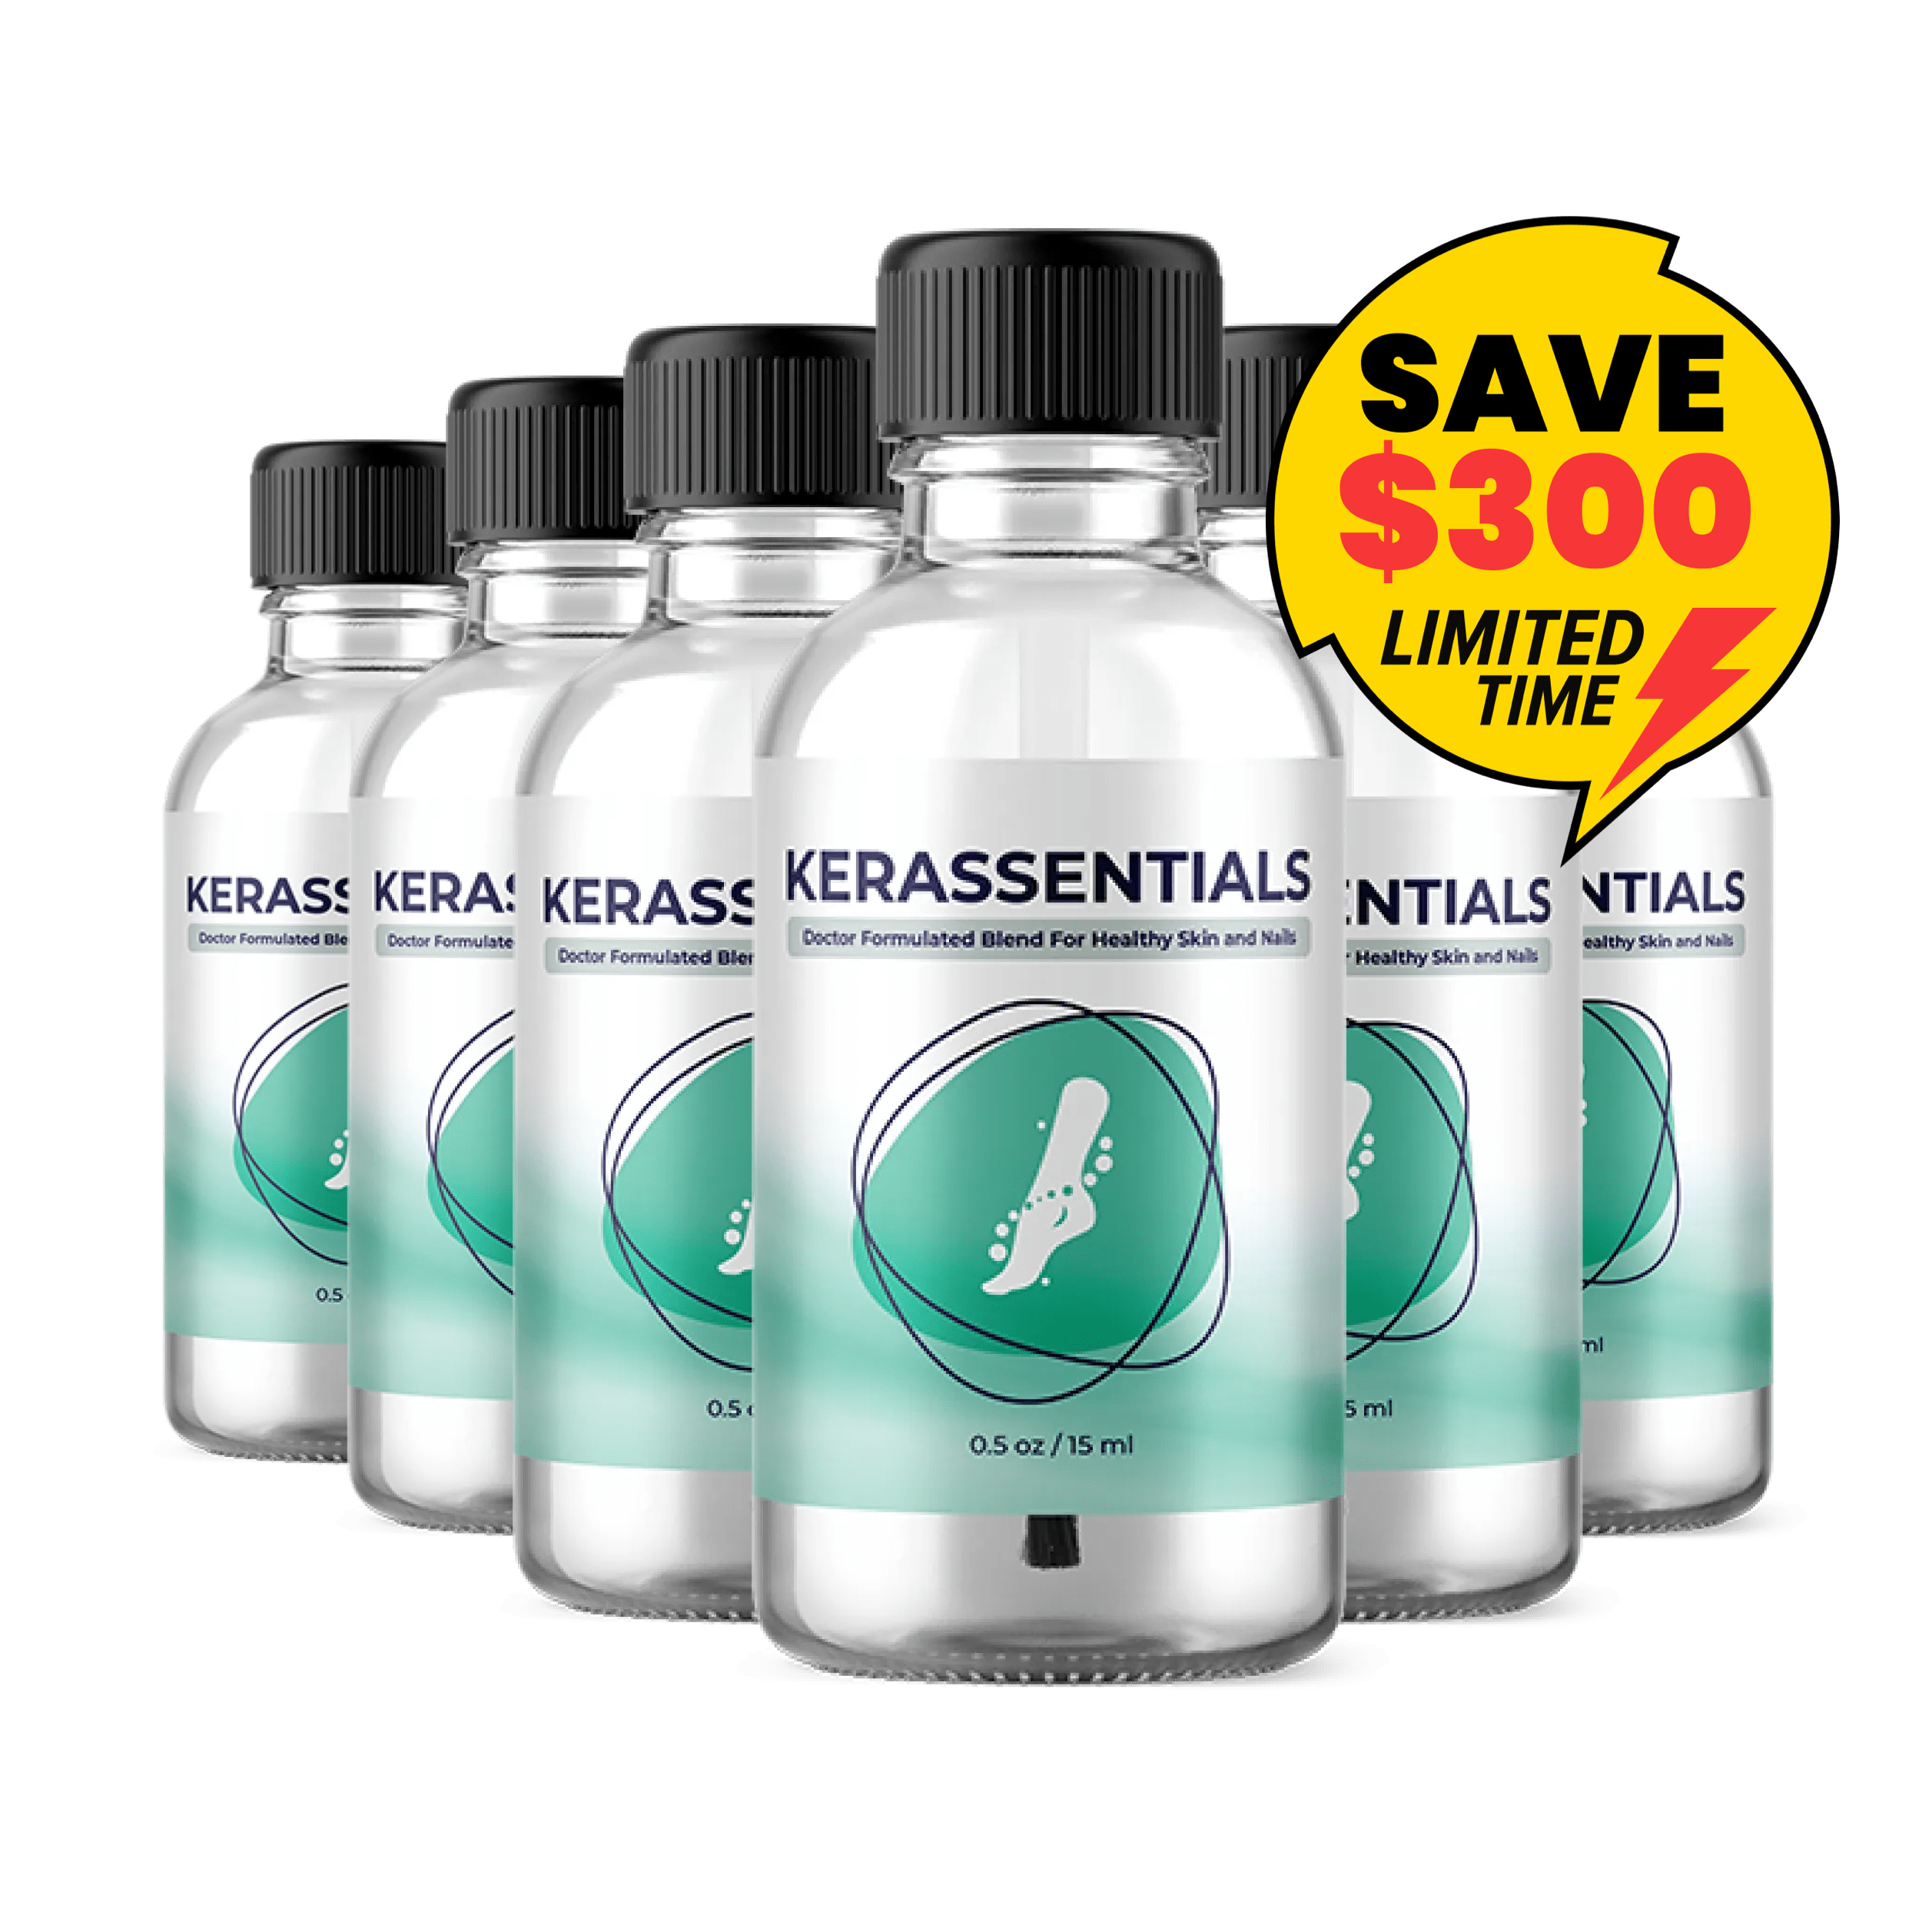 Kerassentials healthy skin and nails support special price